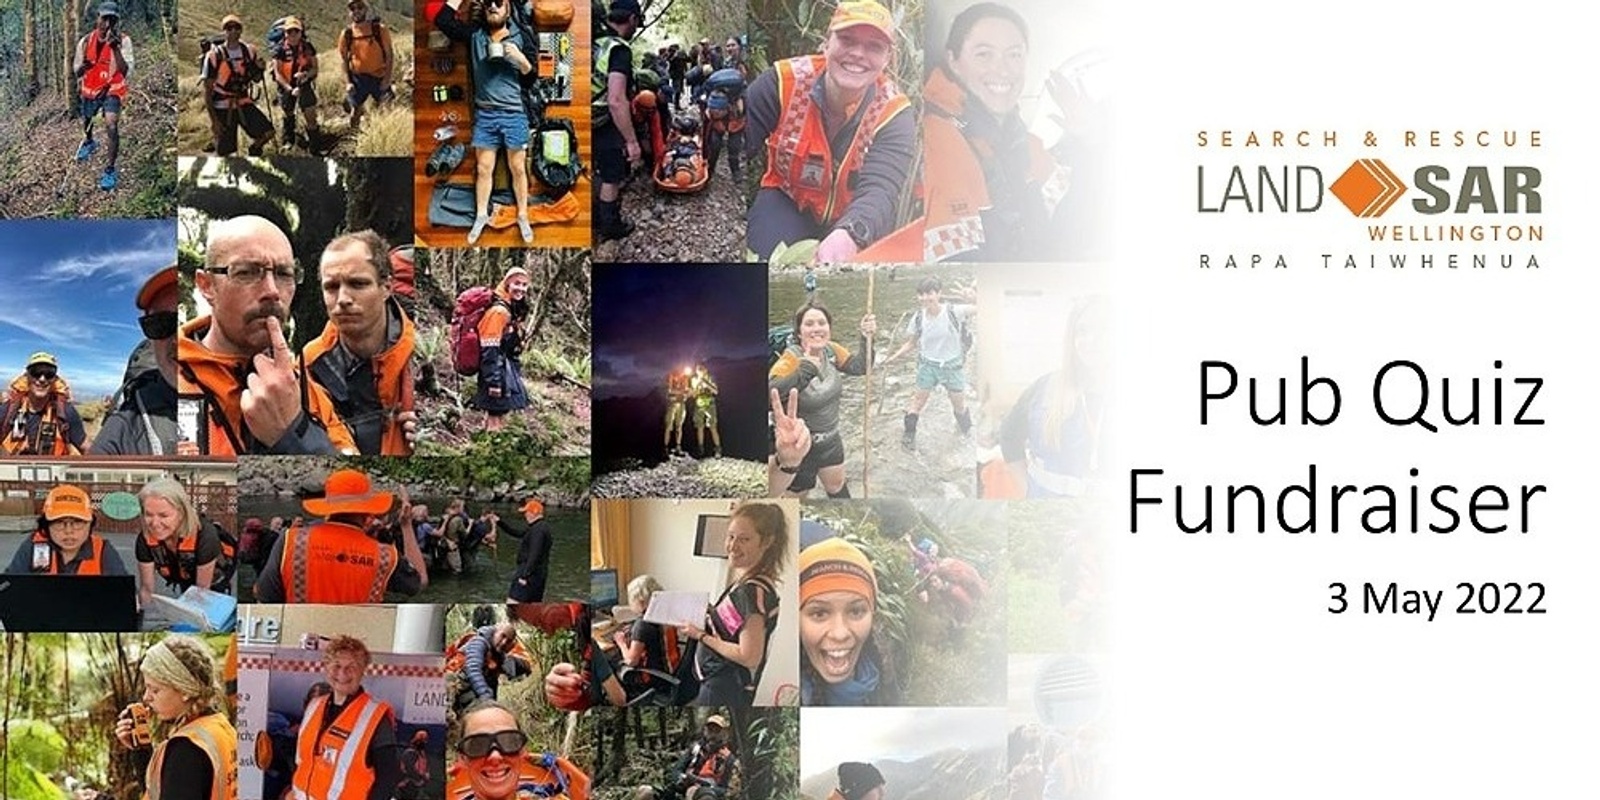 Banner image for Pub Quiz fundraiser for Land Search and Rescue Wellington